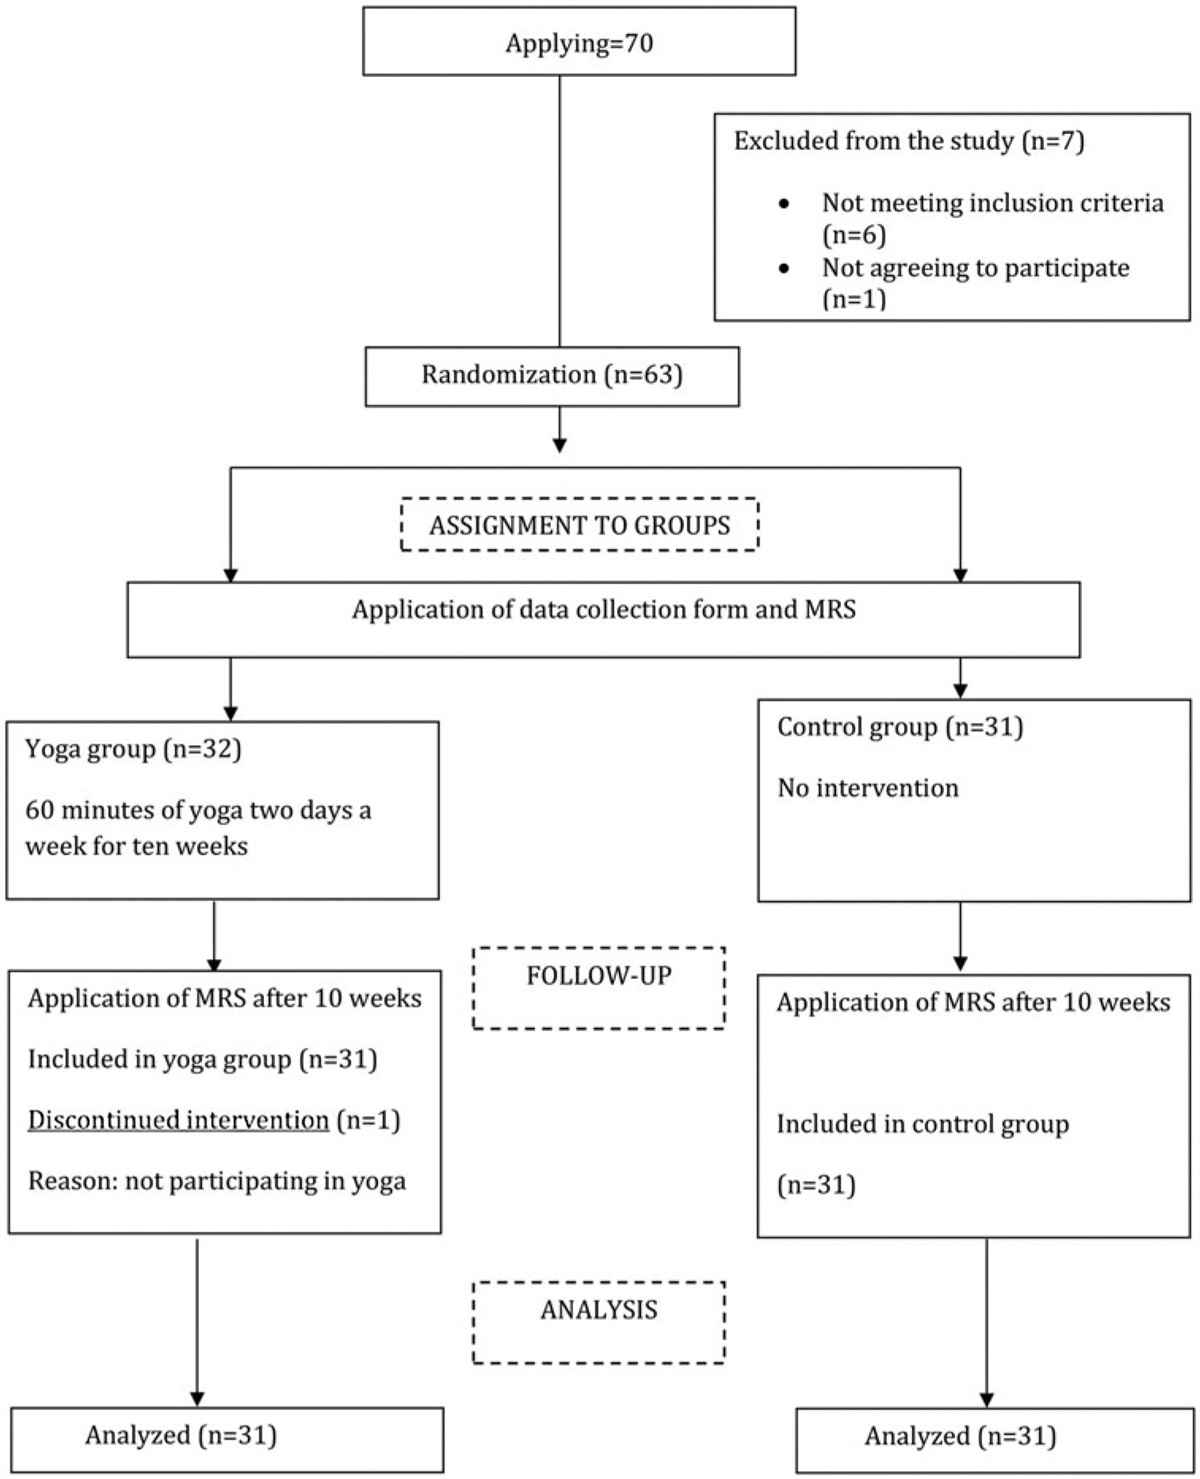 The Effect of Yoga on Menopause Symptoms: A Randomized Controlled Trial